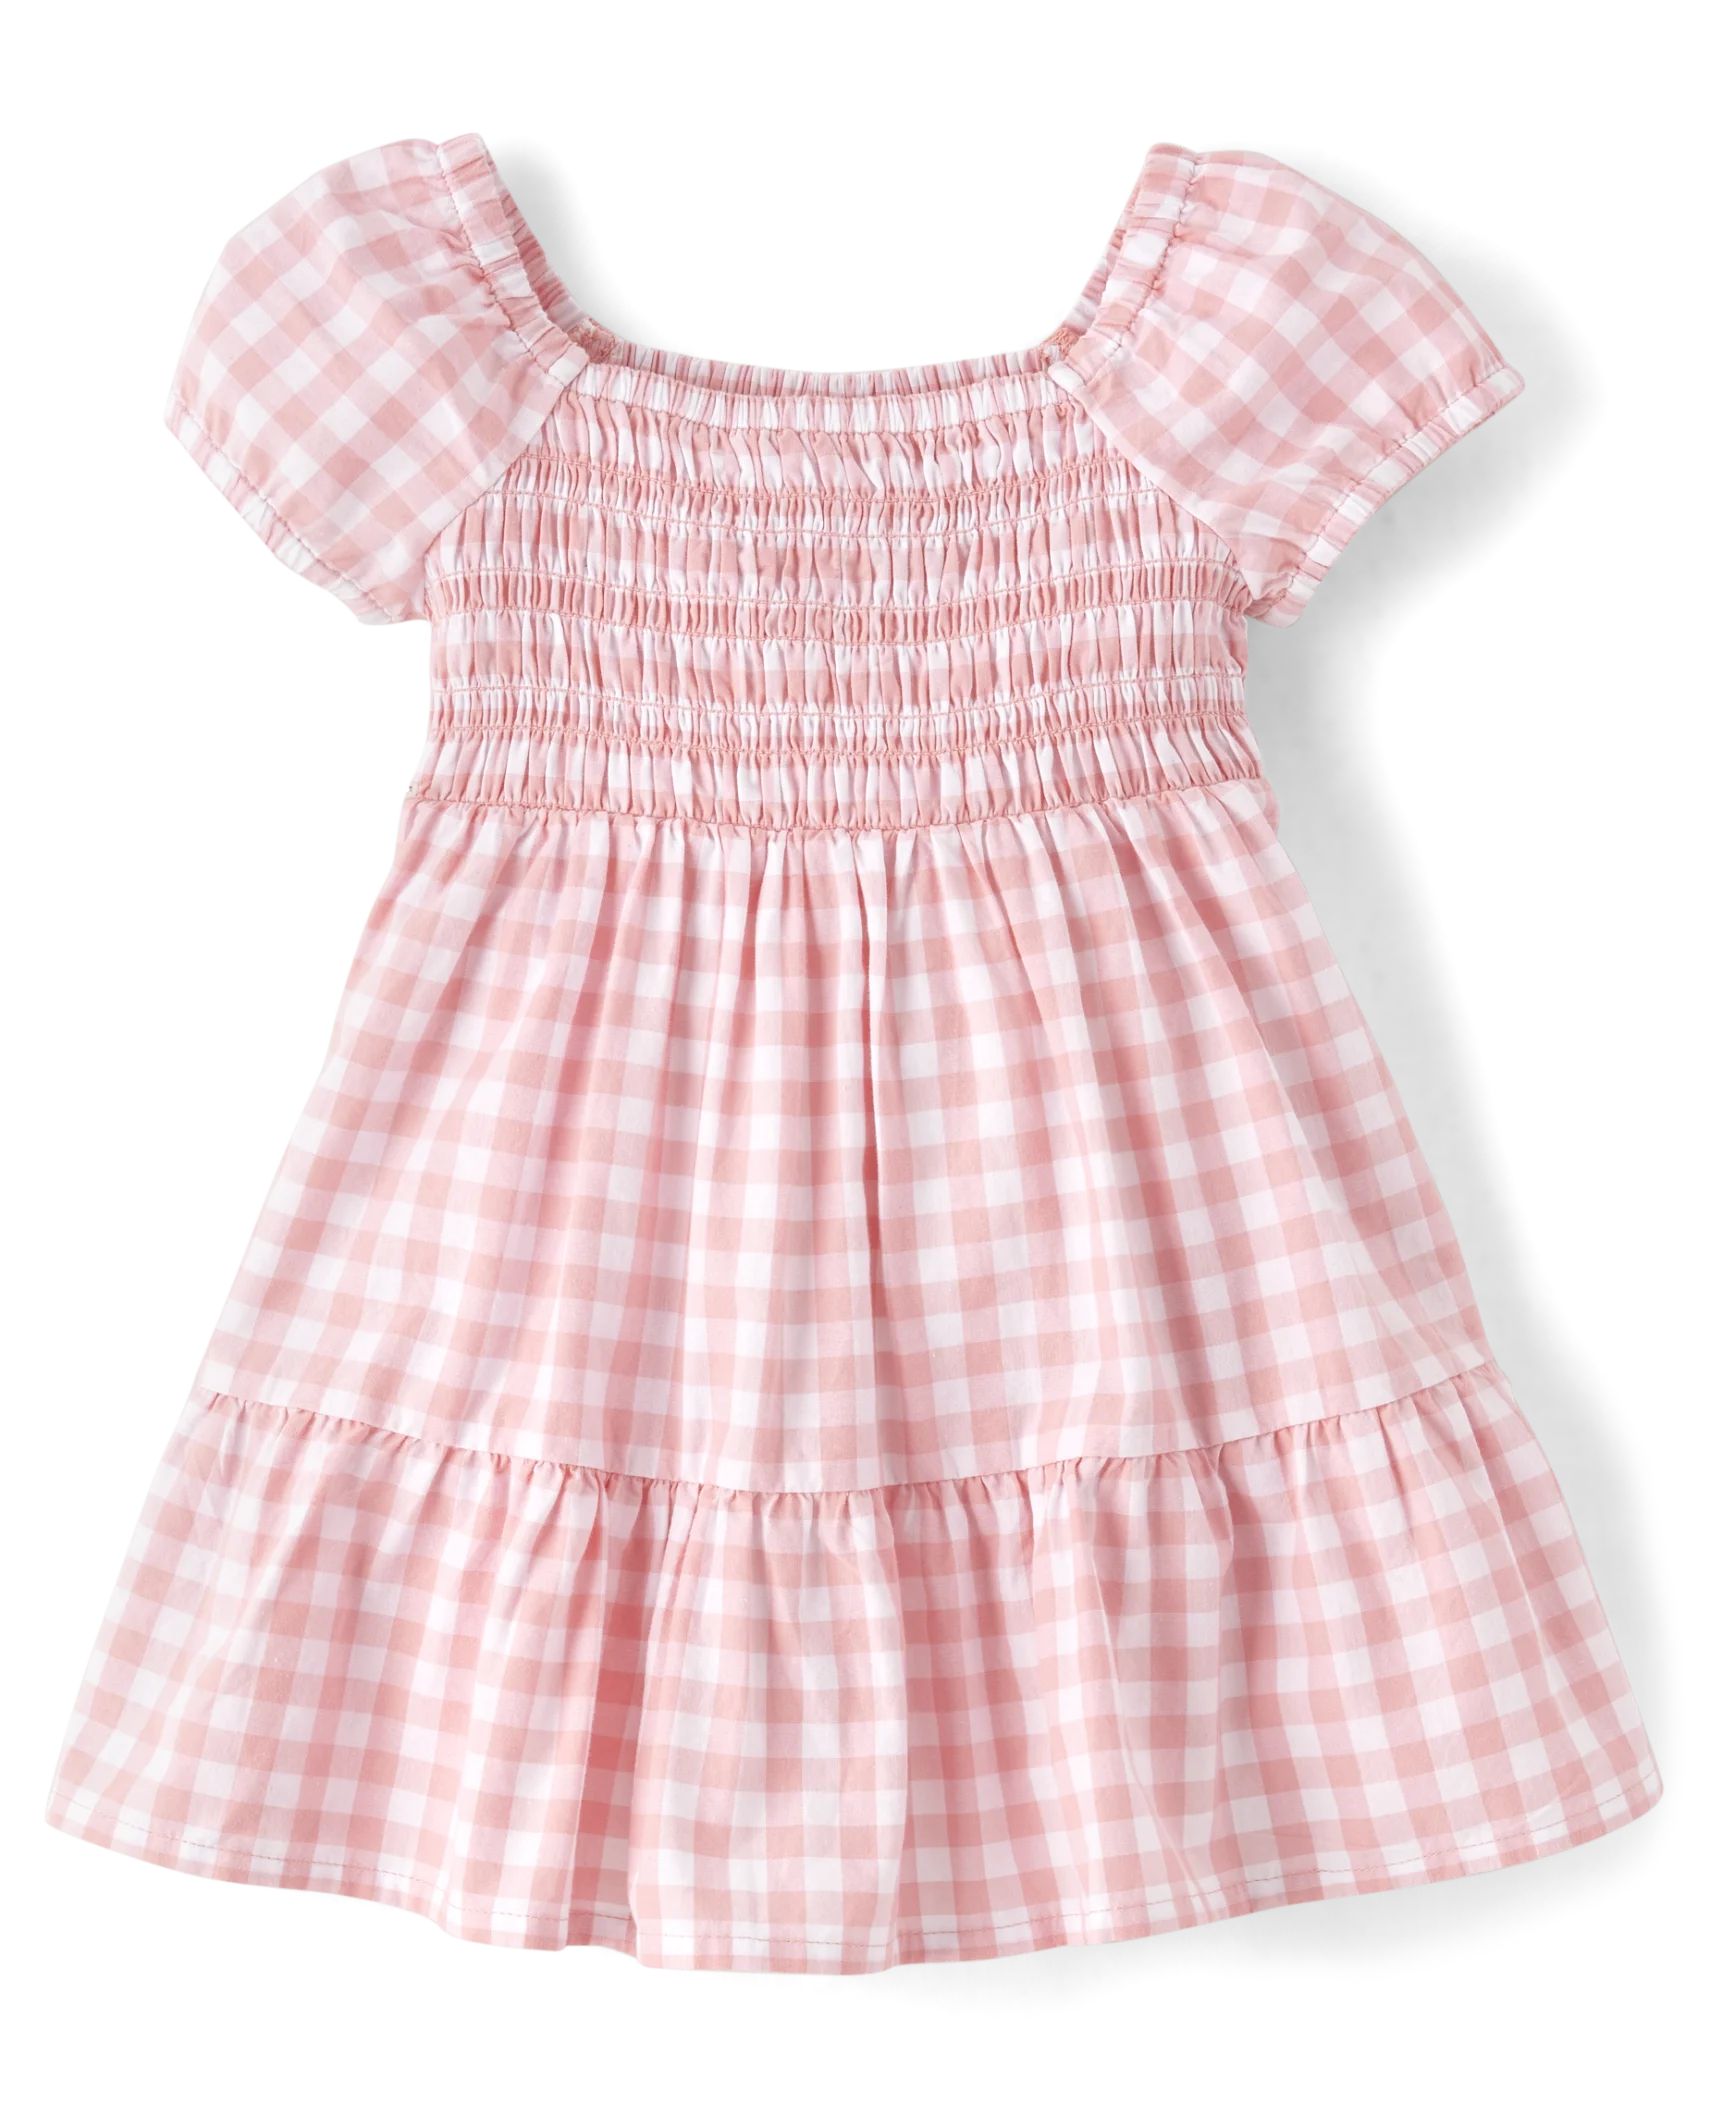 Toddler Girls Mommy And Me Gingham Poplin Ruffle Dress - rose petal | The Children's Place